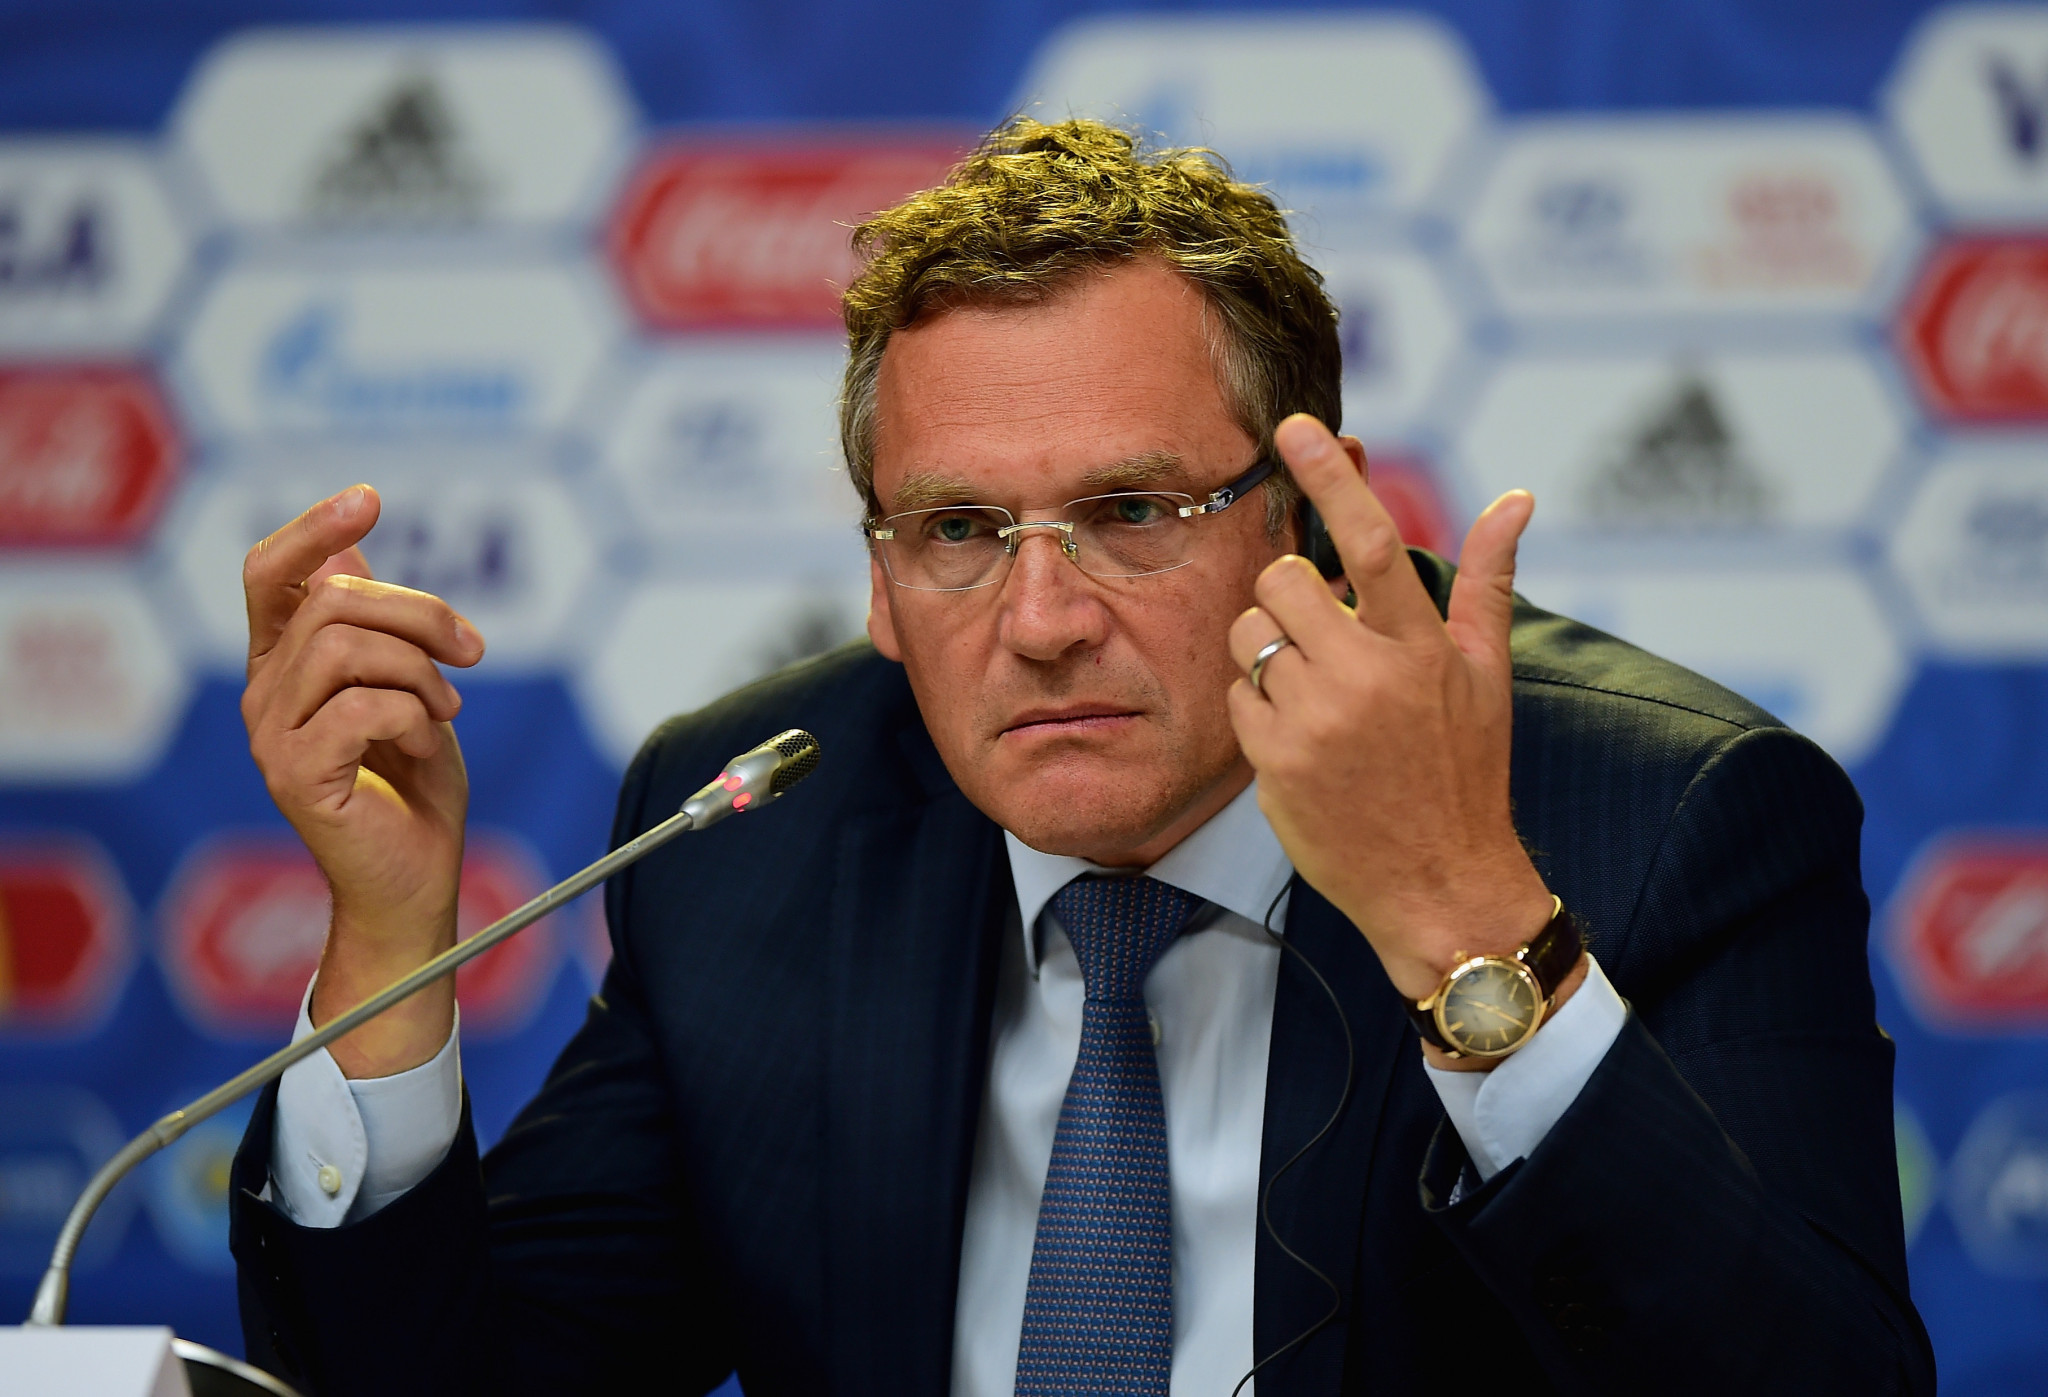 Valcke, already banned from football for ten years by FIFA, denies all charges against him in this trial ©Getty Images